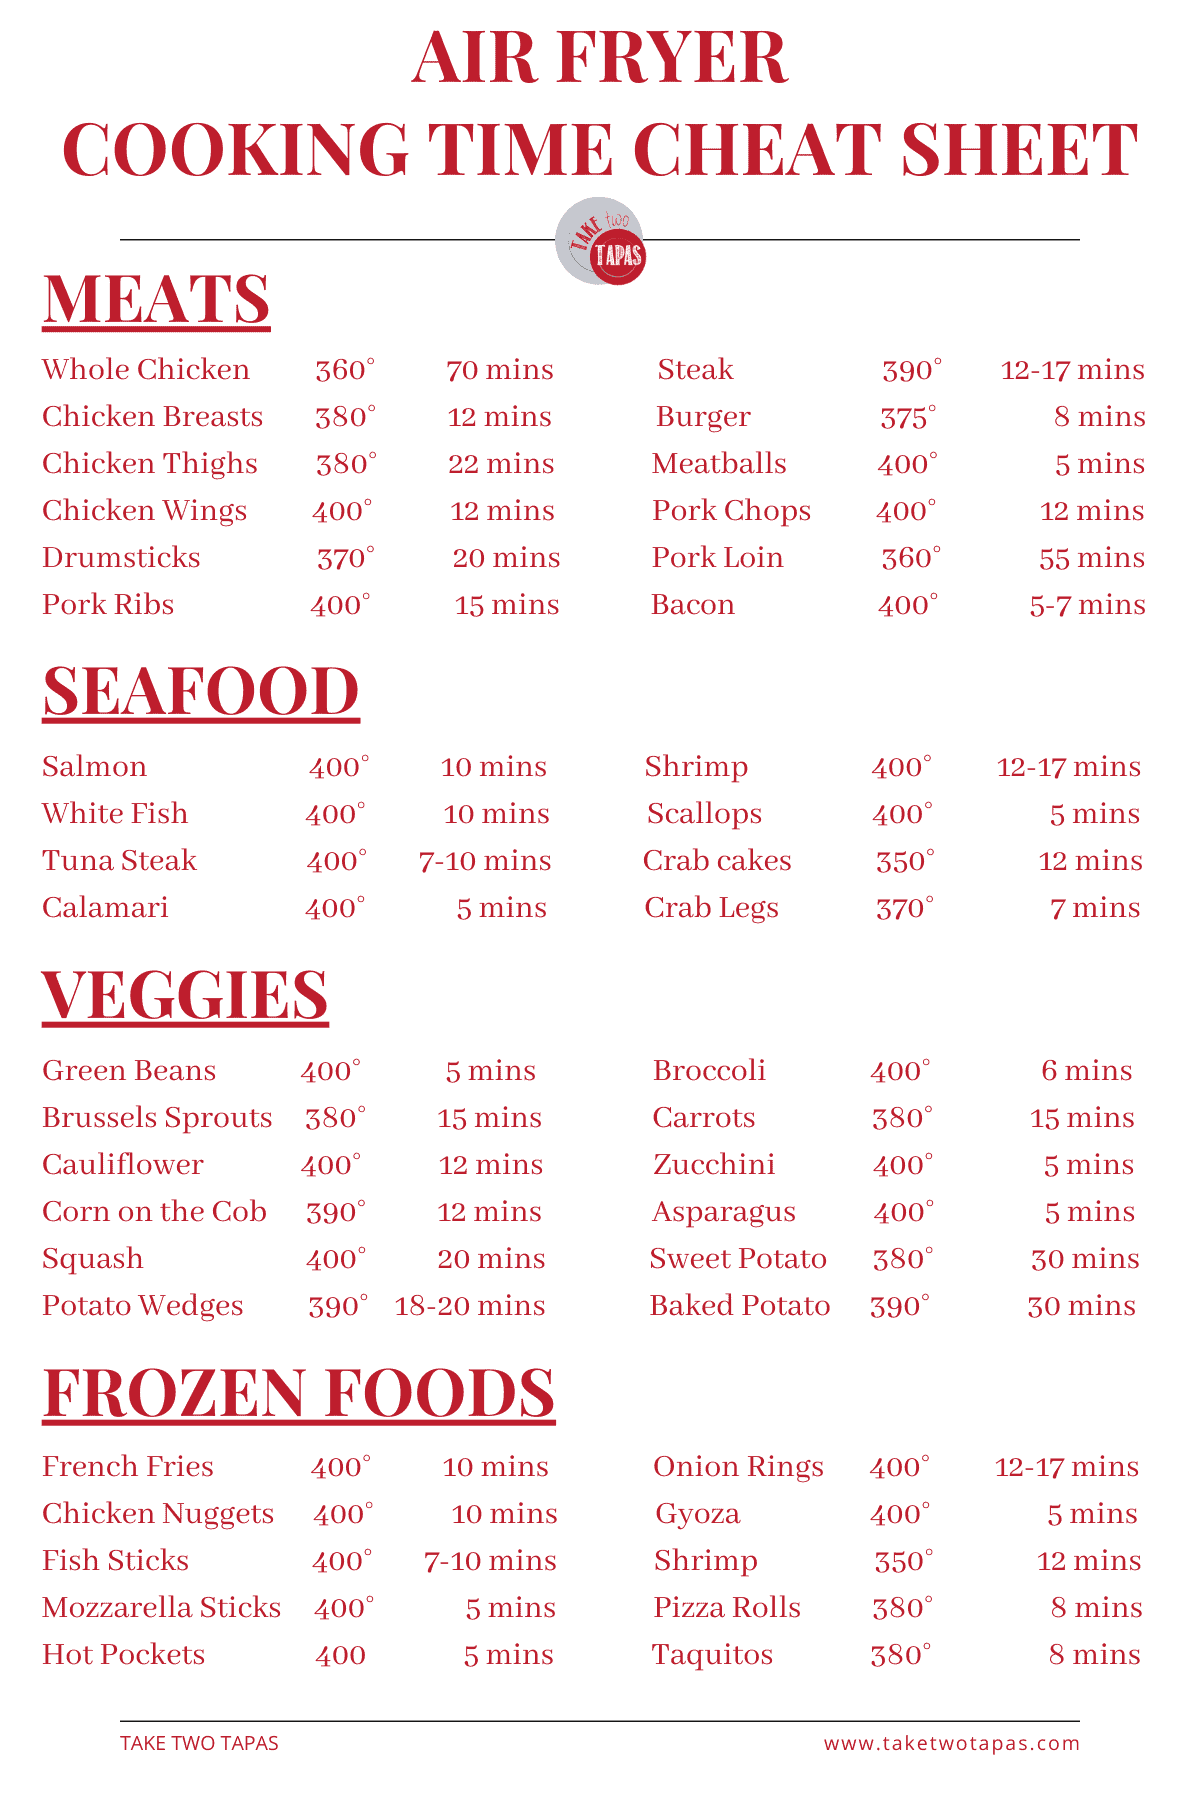 AIR FRYER COOKING TIME CHEAT SHEET 